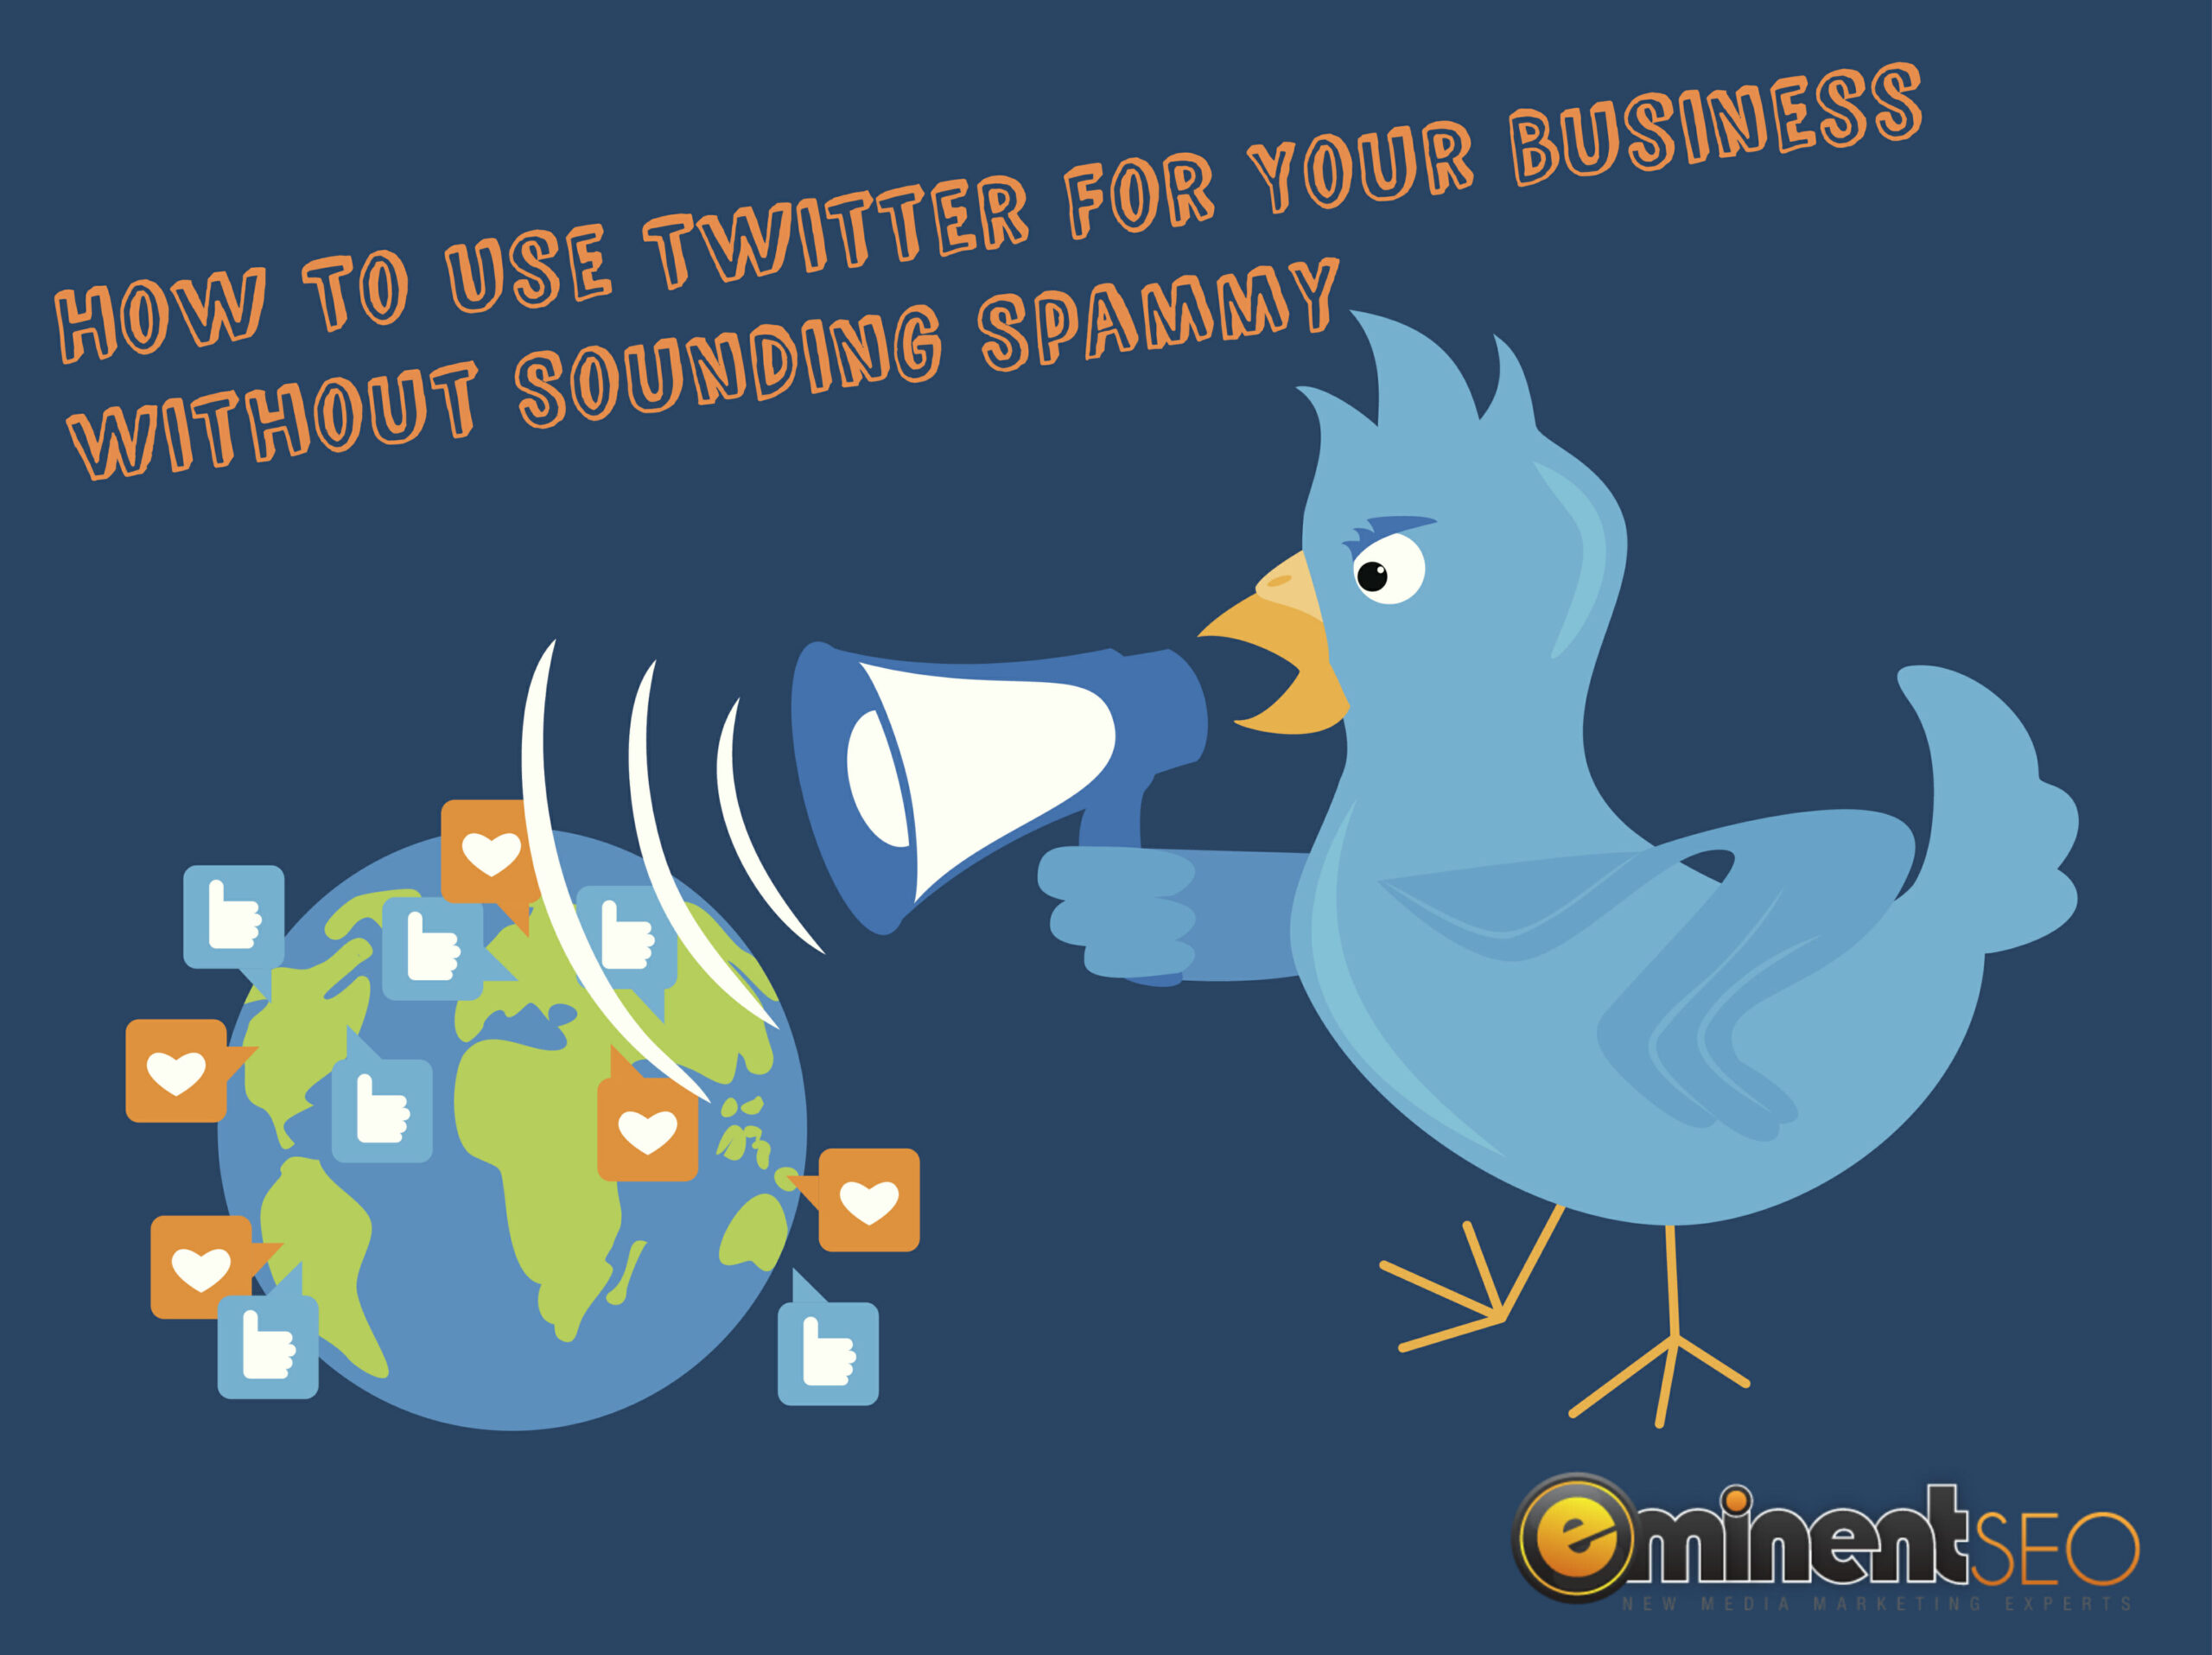 How To Use Twitter For Your Business Without Sounding Spammy